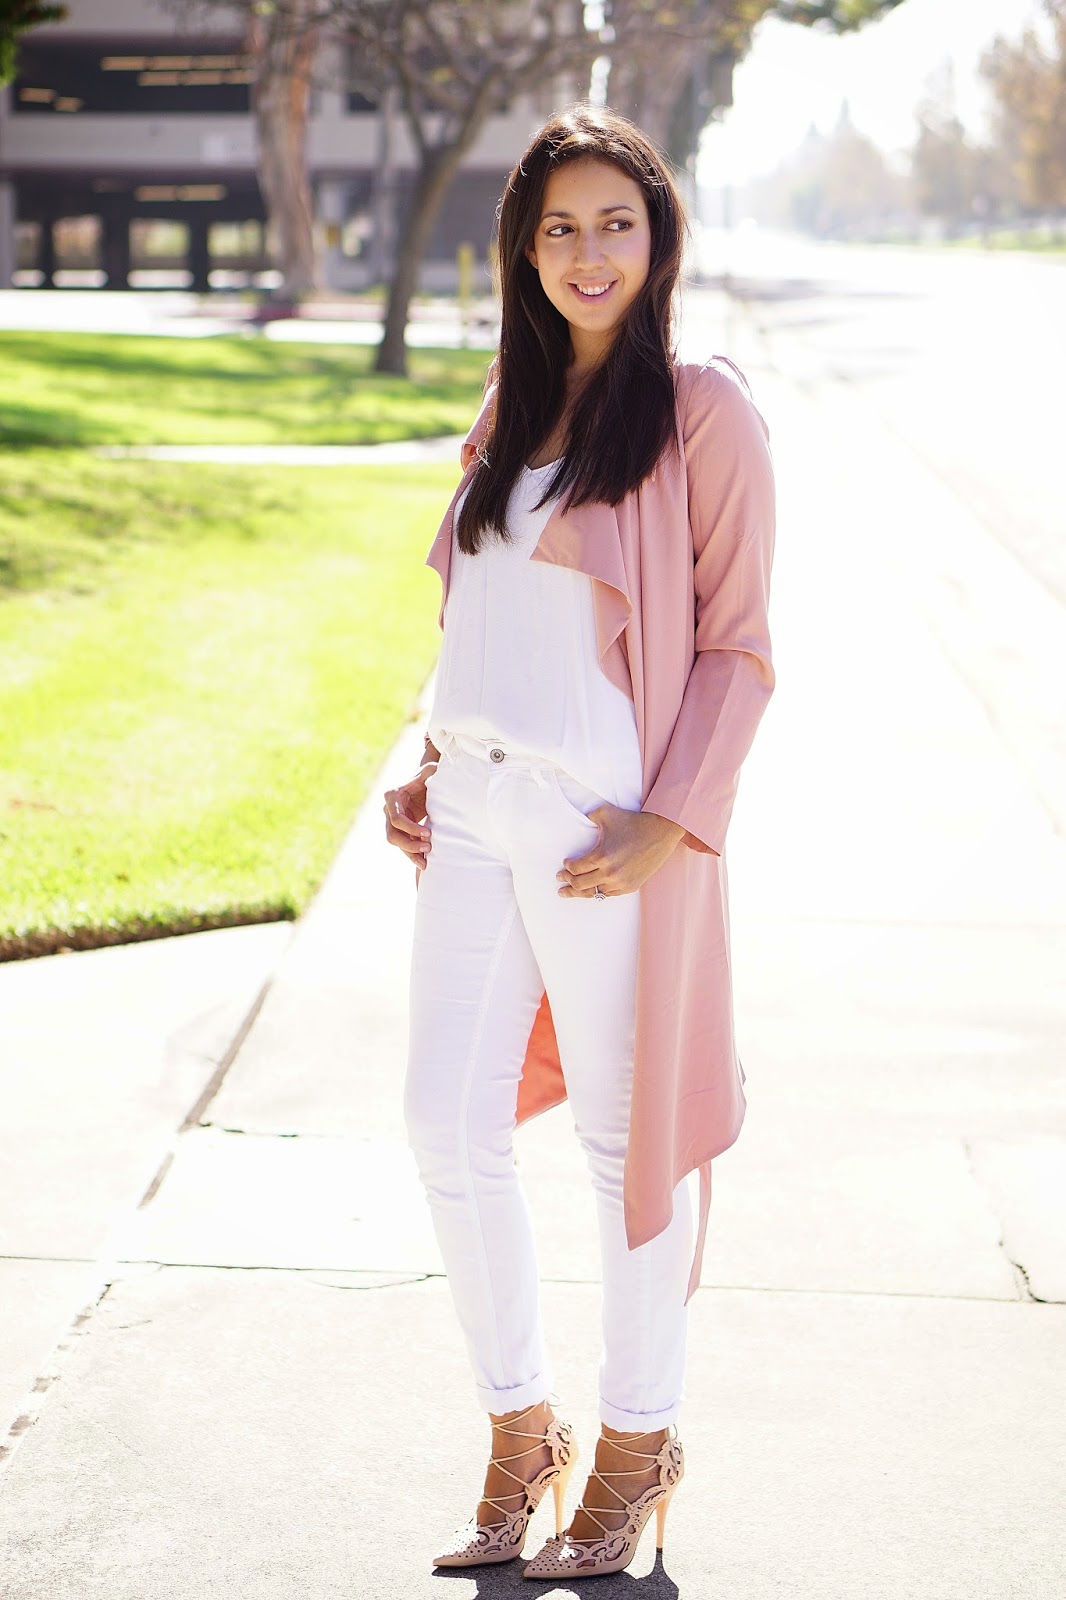 White Mango Cami, MNG by Mango, JCPenney, Arizona Skinny Jeans, White Jeans, Shoedazzle, Pink Trench Coat, Windsor Pink Trench Coat, Windsor, Neutral Outfit, Nude Laser Cut Heels, Christian Louboutin Inspired Heels, California Fall Fashion